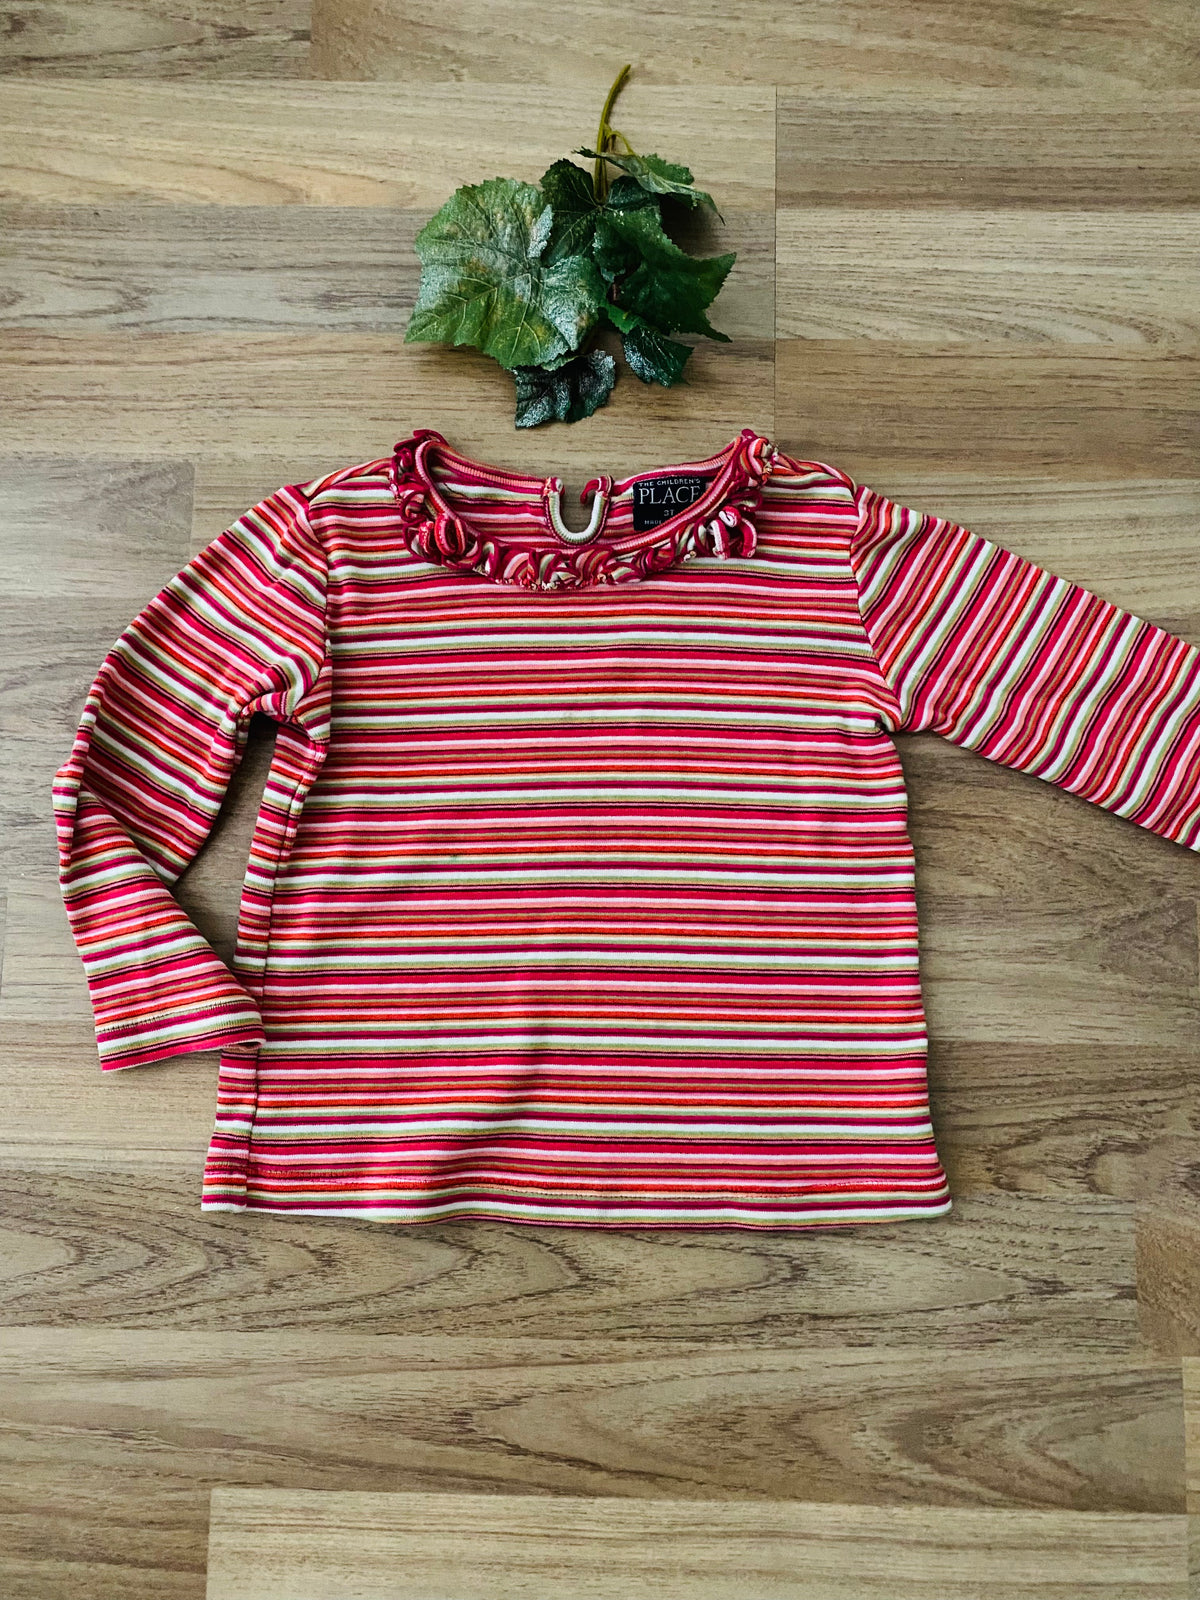 Long Sleeve Striped Top (Girls Size 3)